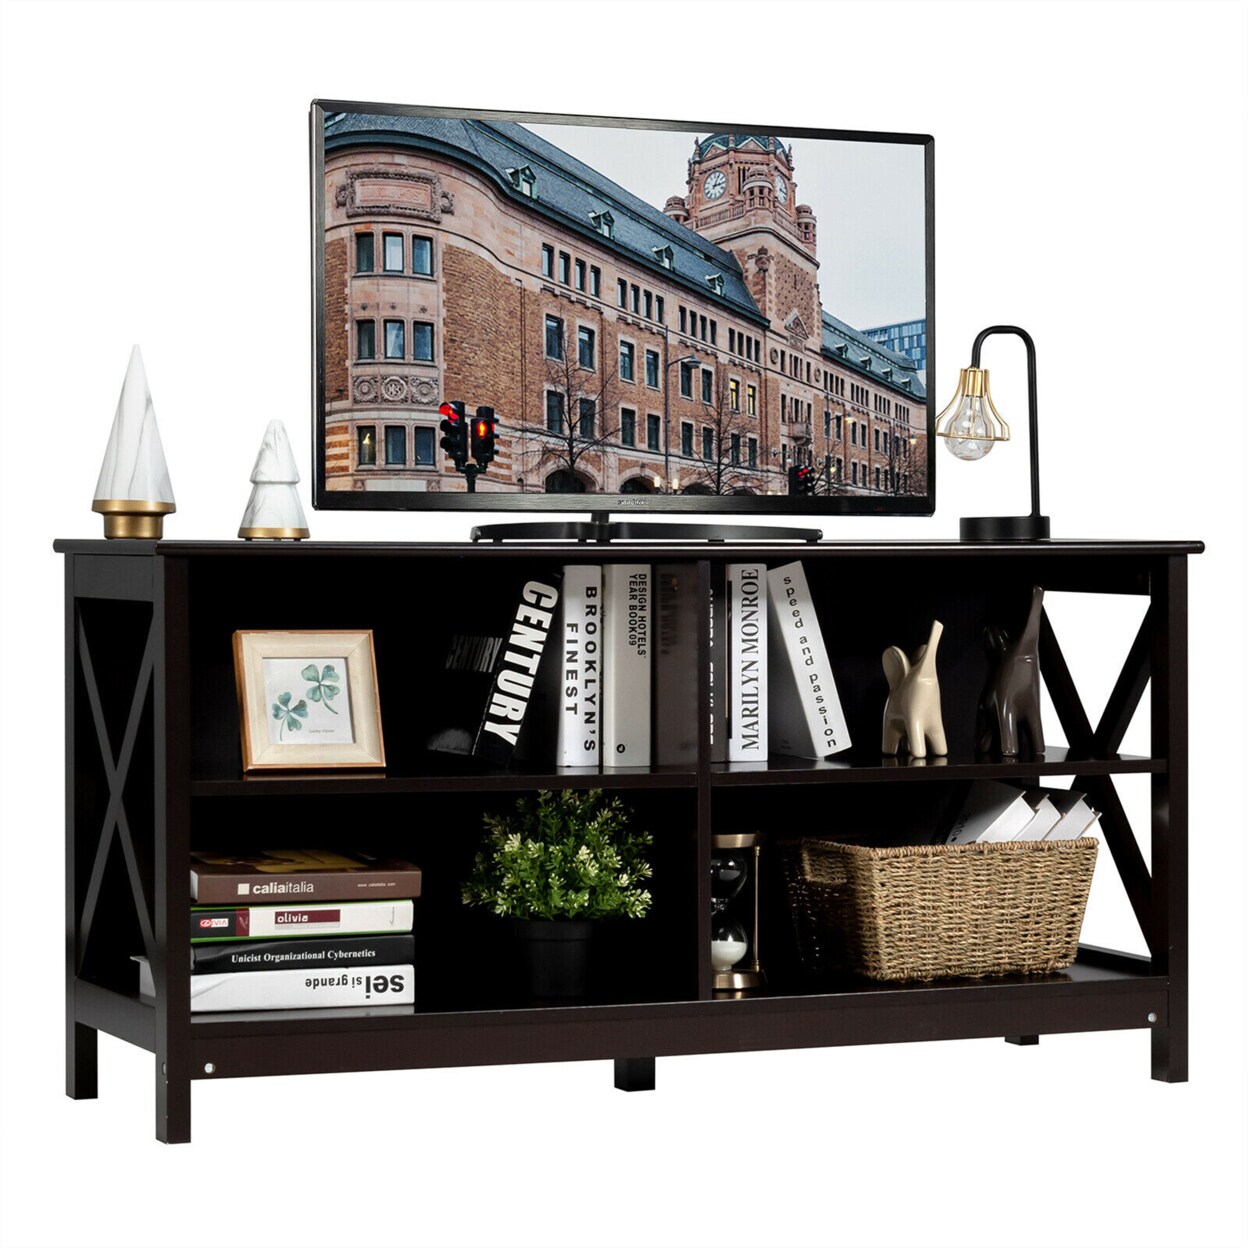 Gymax TV Stand Entertainment Media Center for TVs up to 55 w/ Storage Shelves Brown